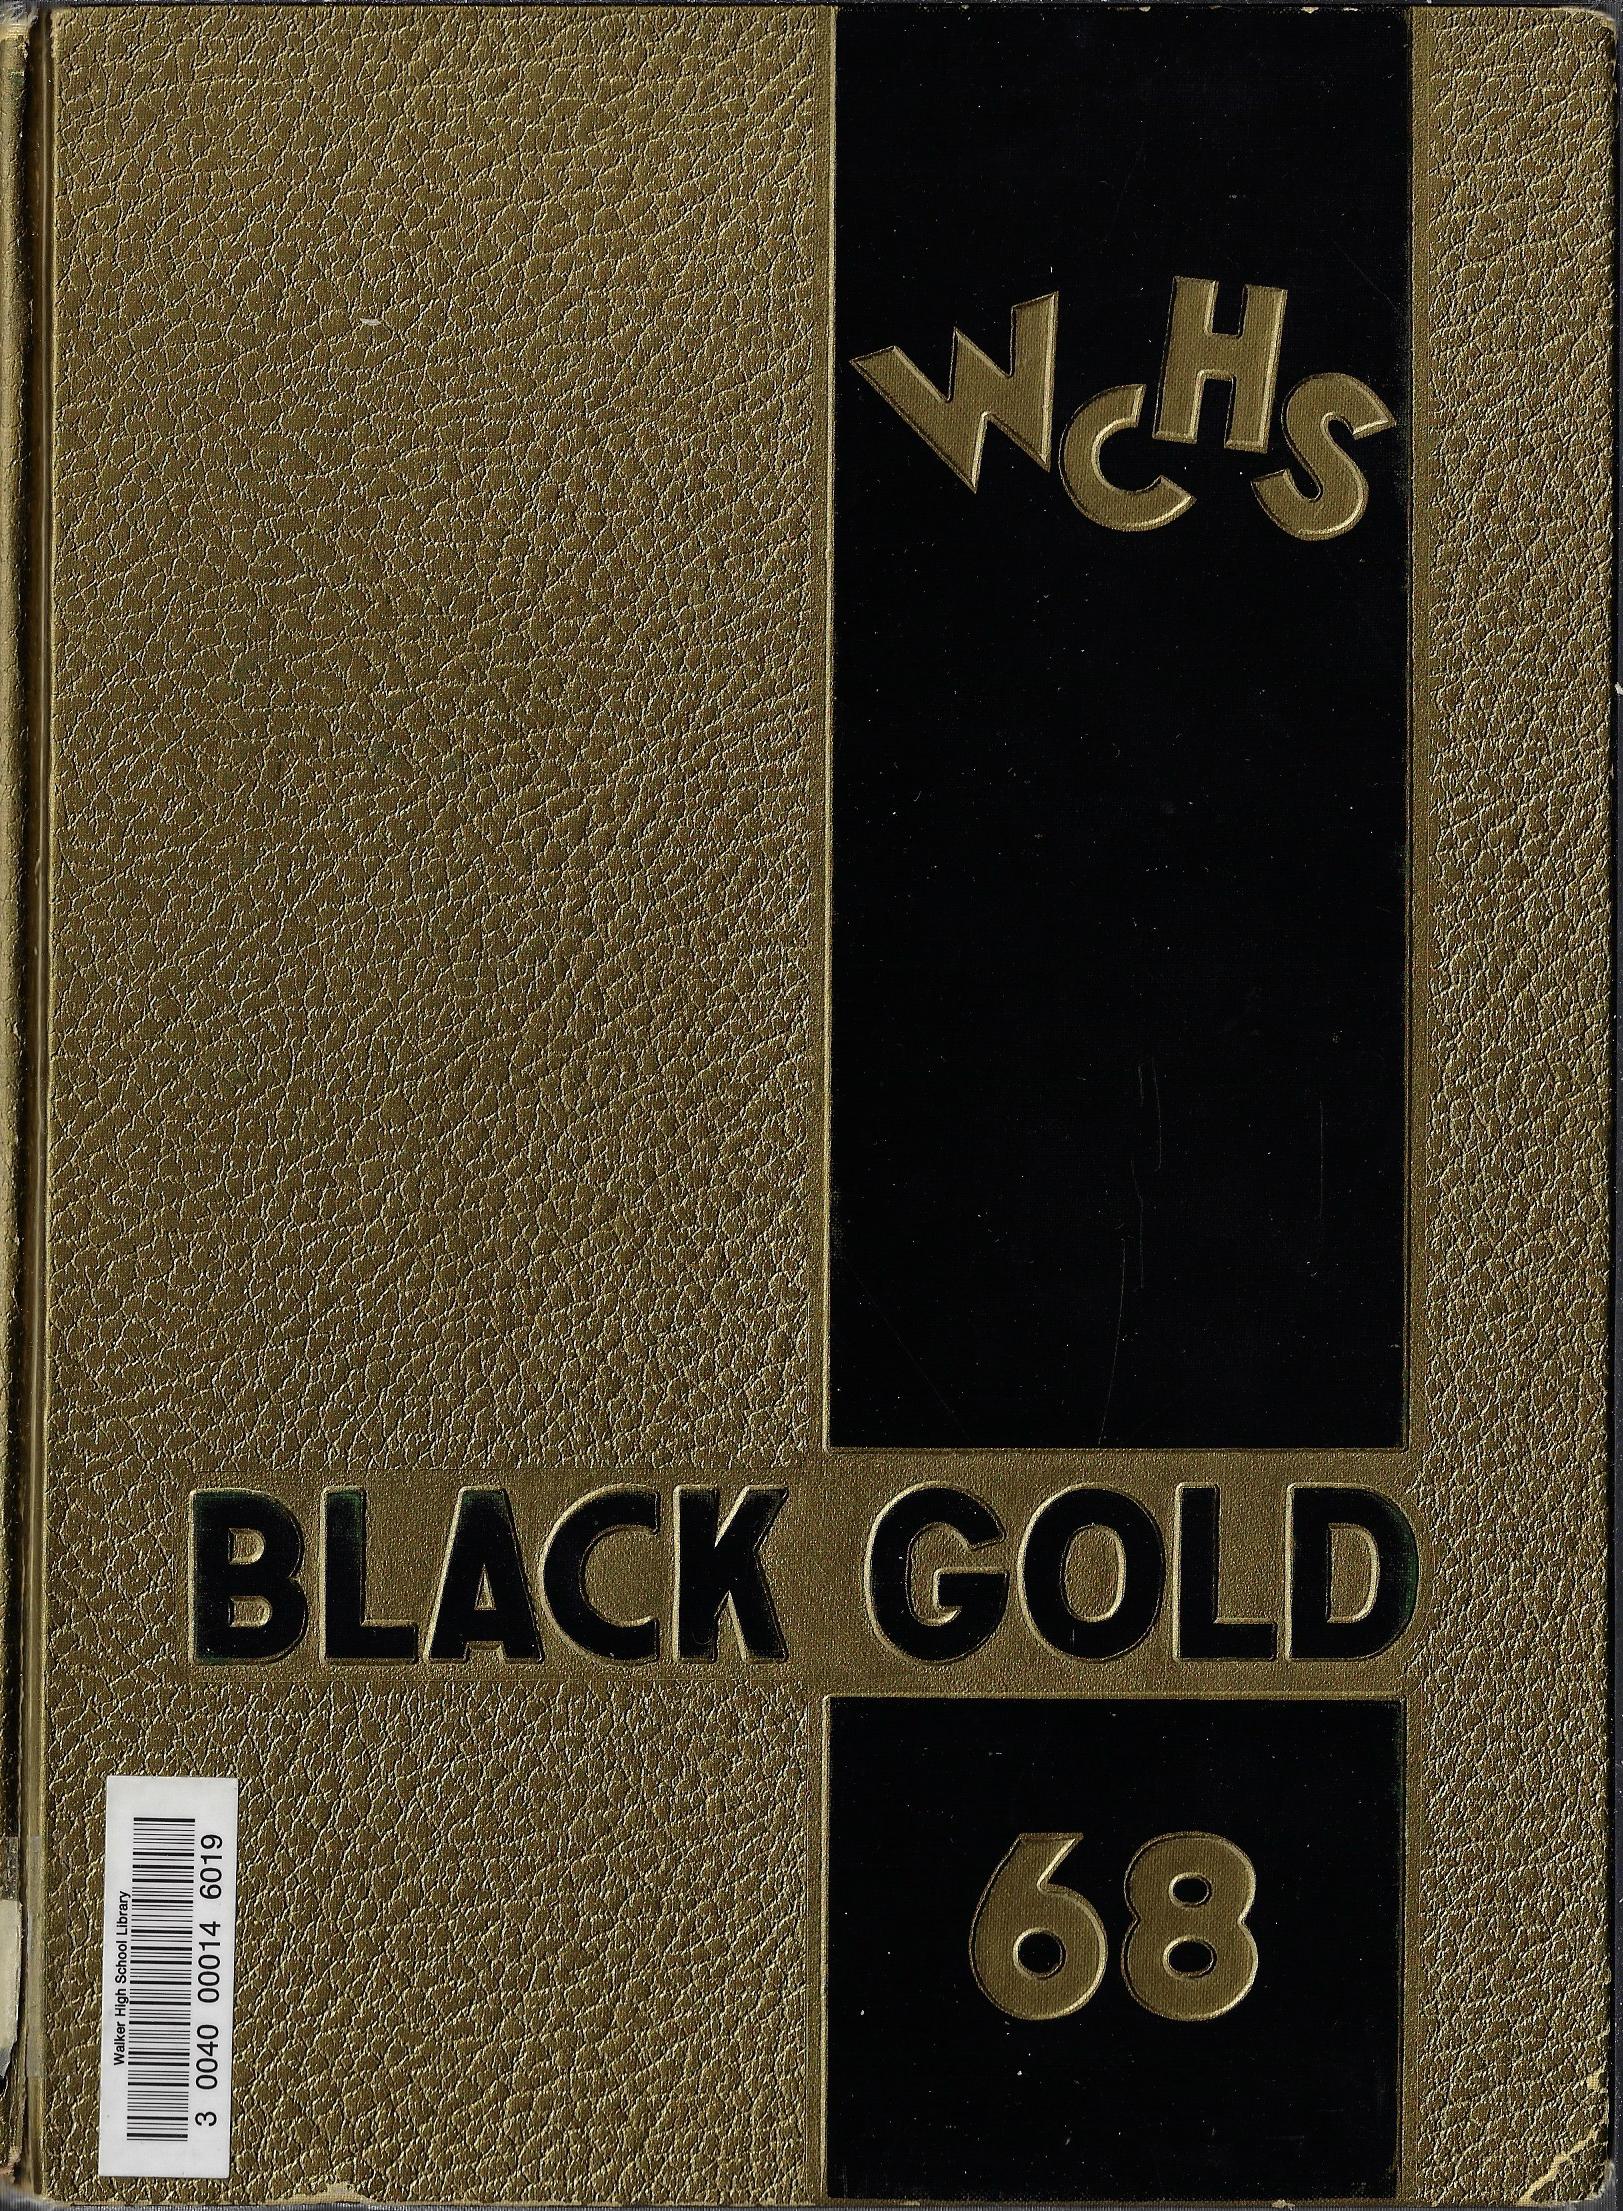 1968 Black Gold Front Cover